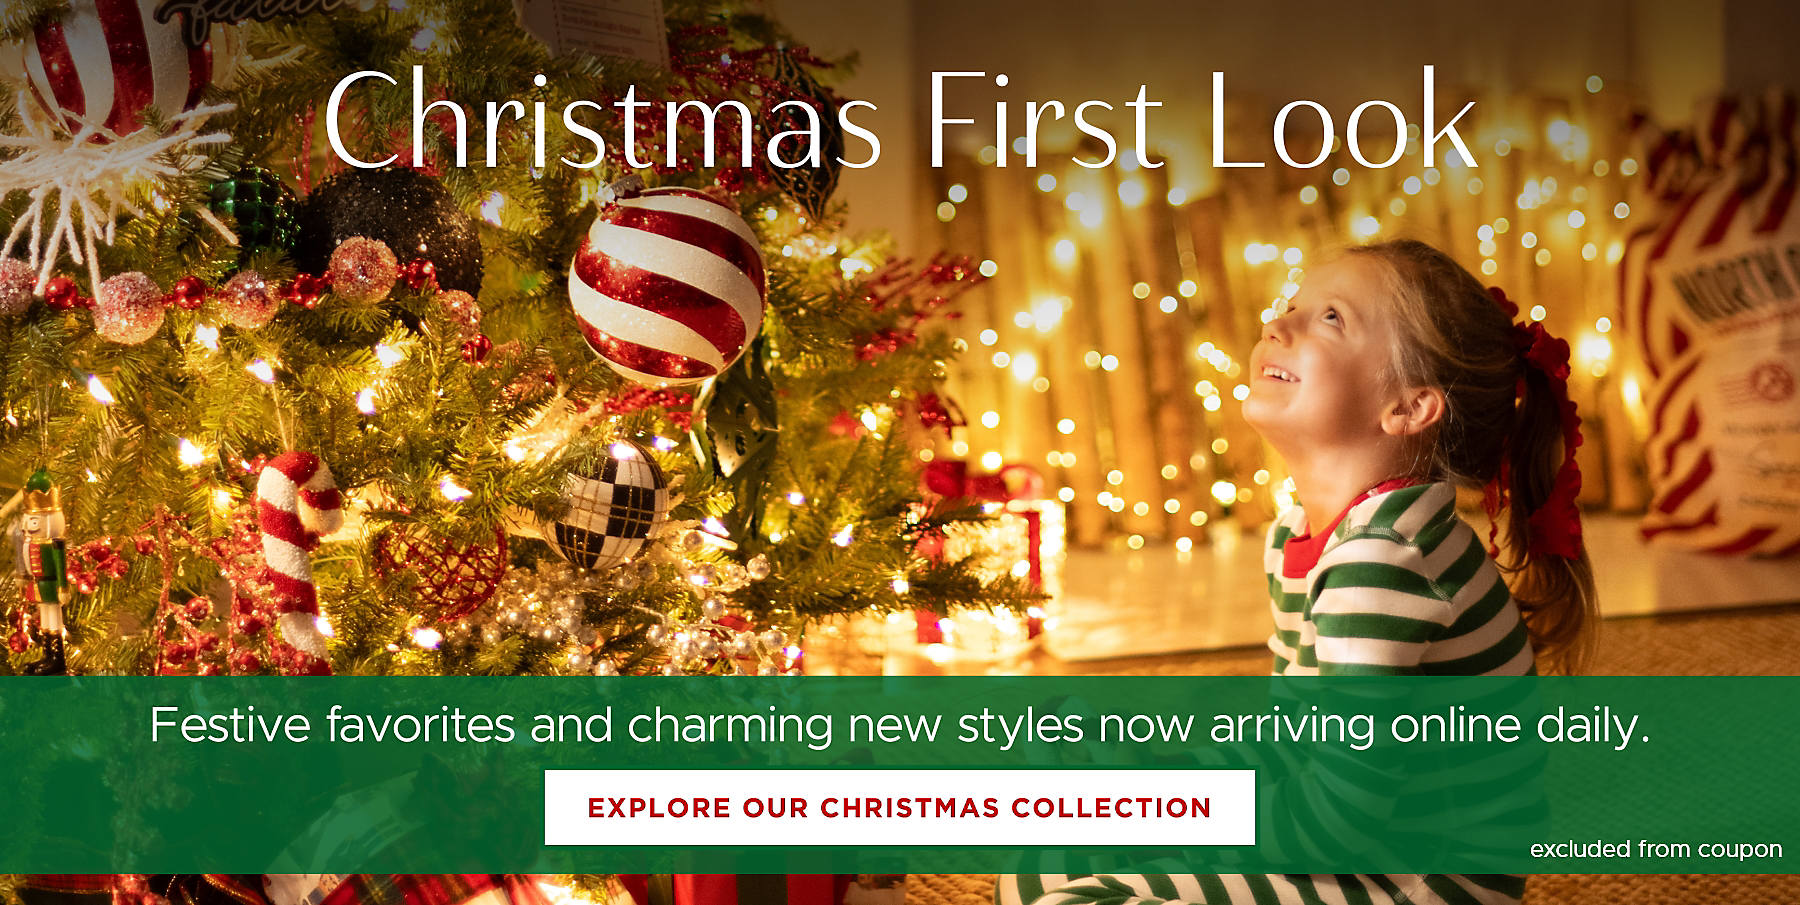 Christmas First Look Festive favorites and charming new styles now arriving online daily. Explore our Christmas Collection excluded from coupon